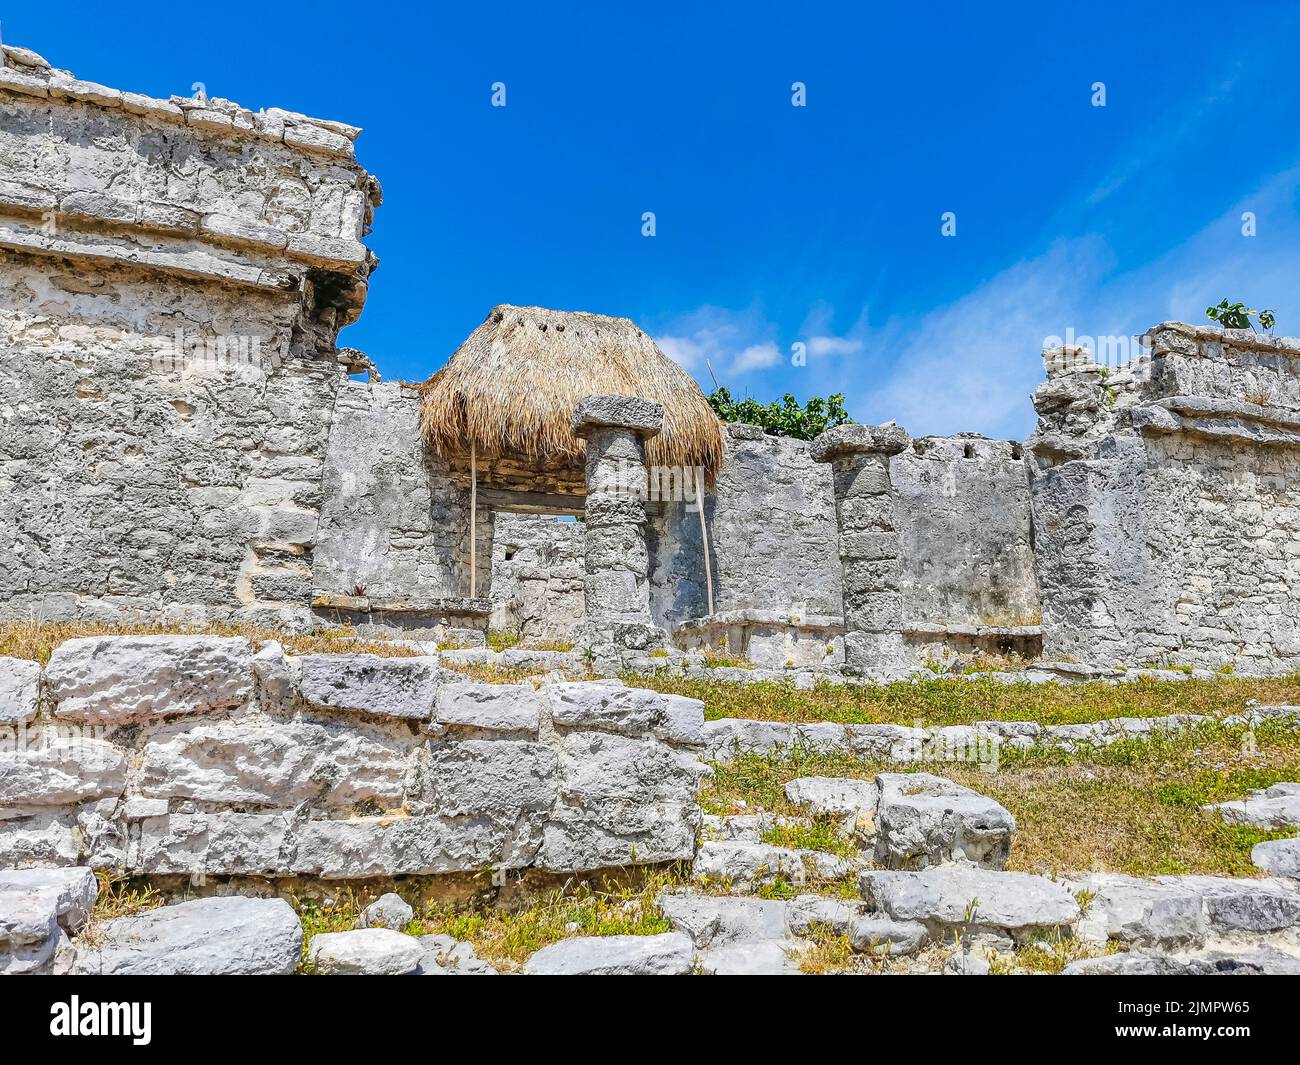 Ancient Tulum ruins Mayan site temple pyramids artifacts seascape Mexico. Stock Photo